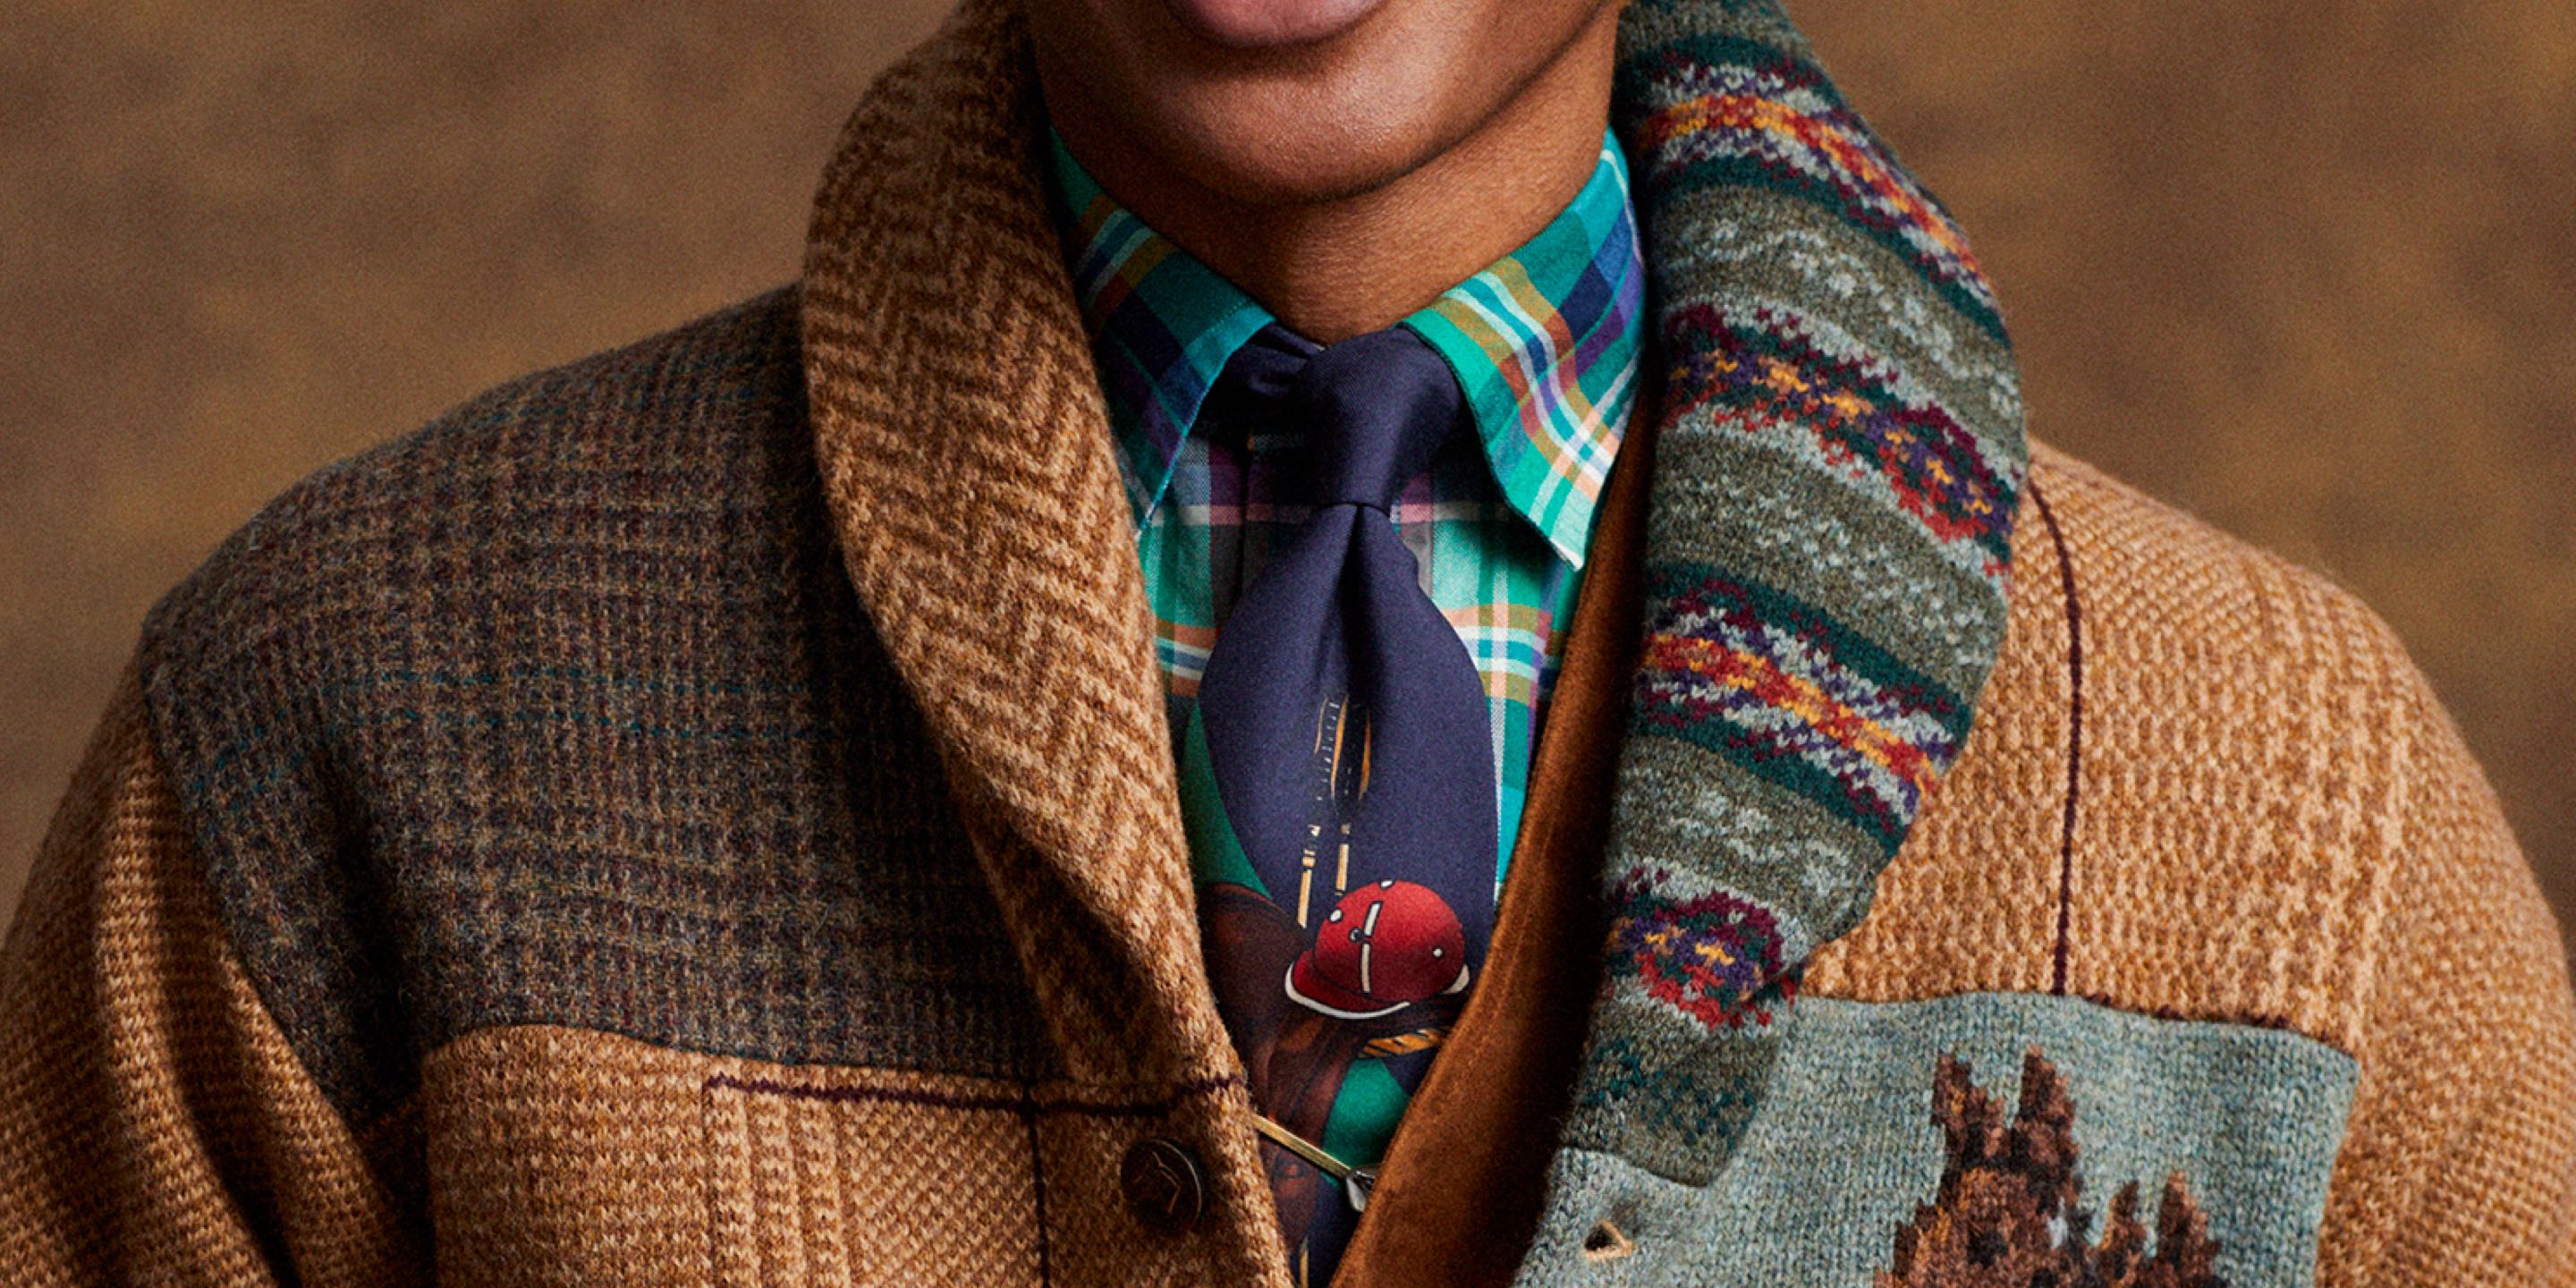 Man in patchwork tweed cardigan wears multicolored tie and plaid dress shirt.